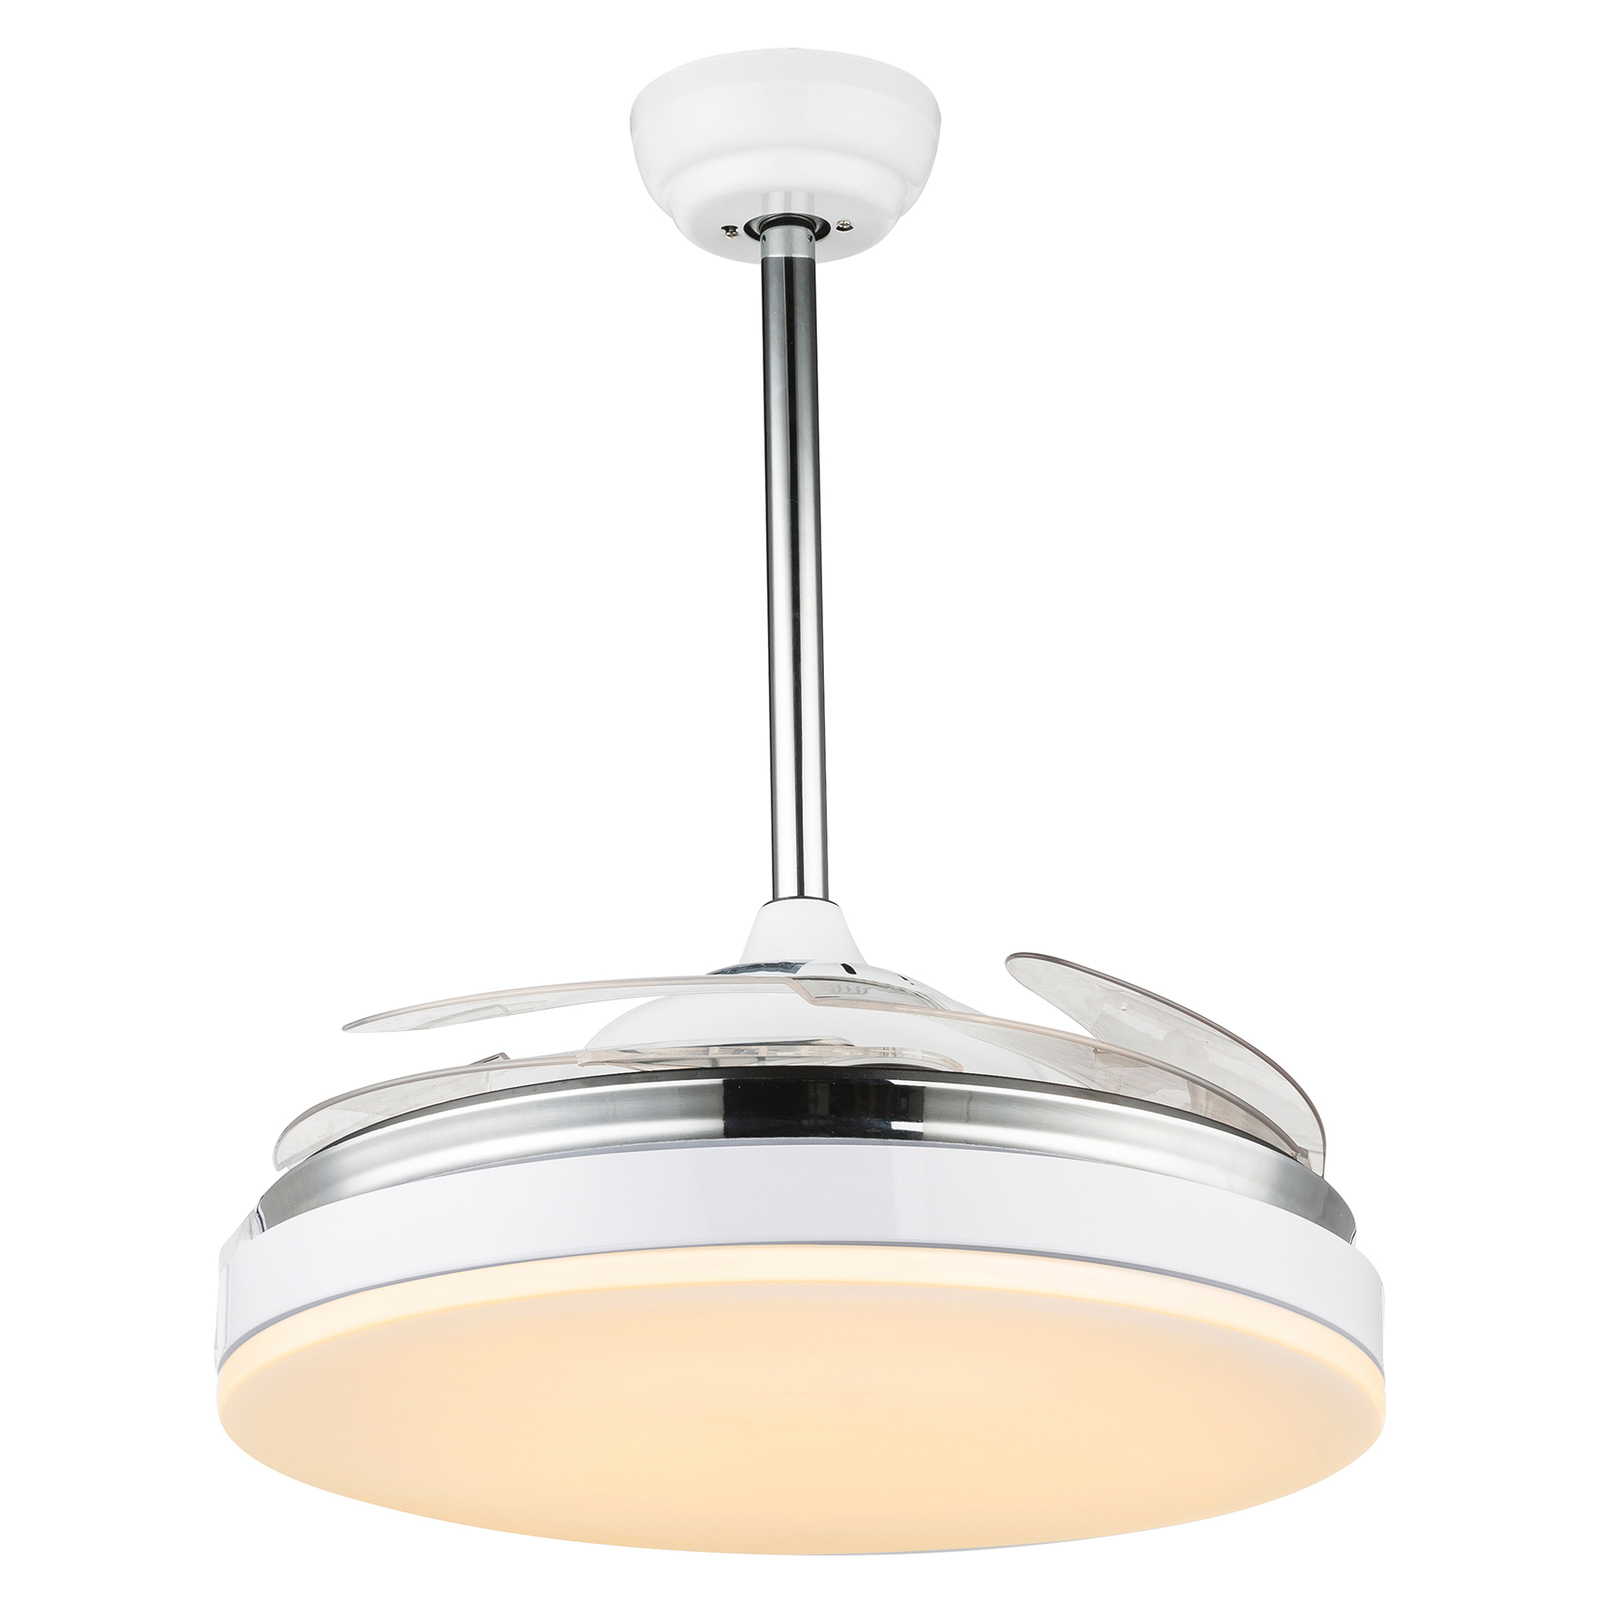 Cabrera LED ceiling fan, CCT, white